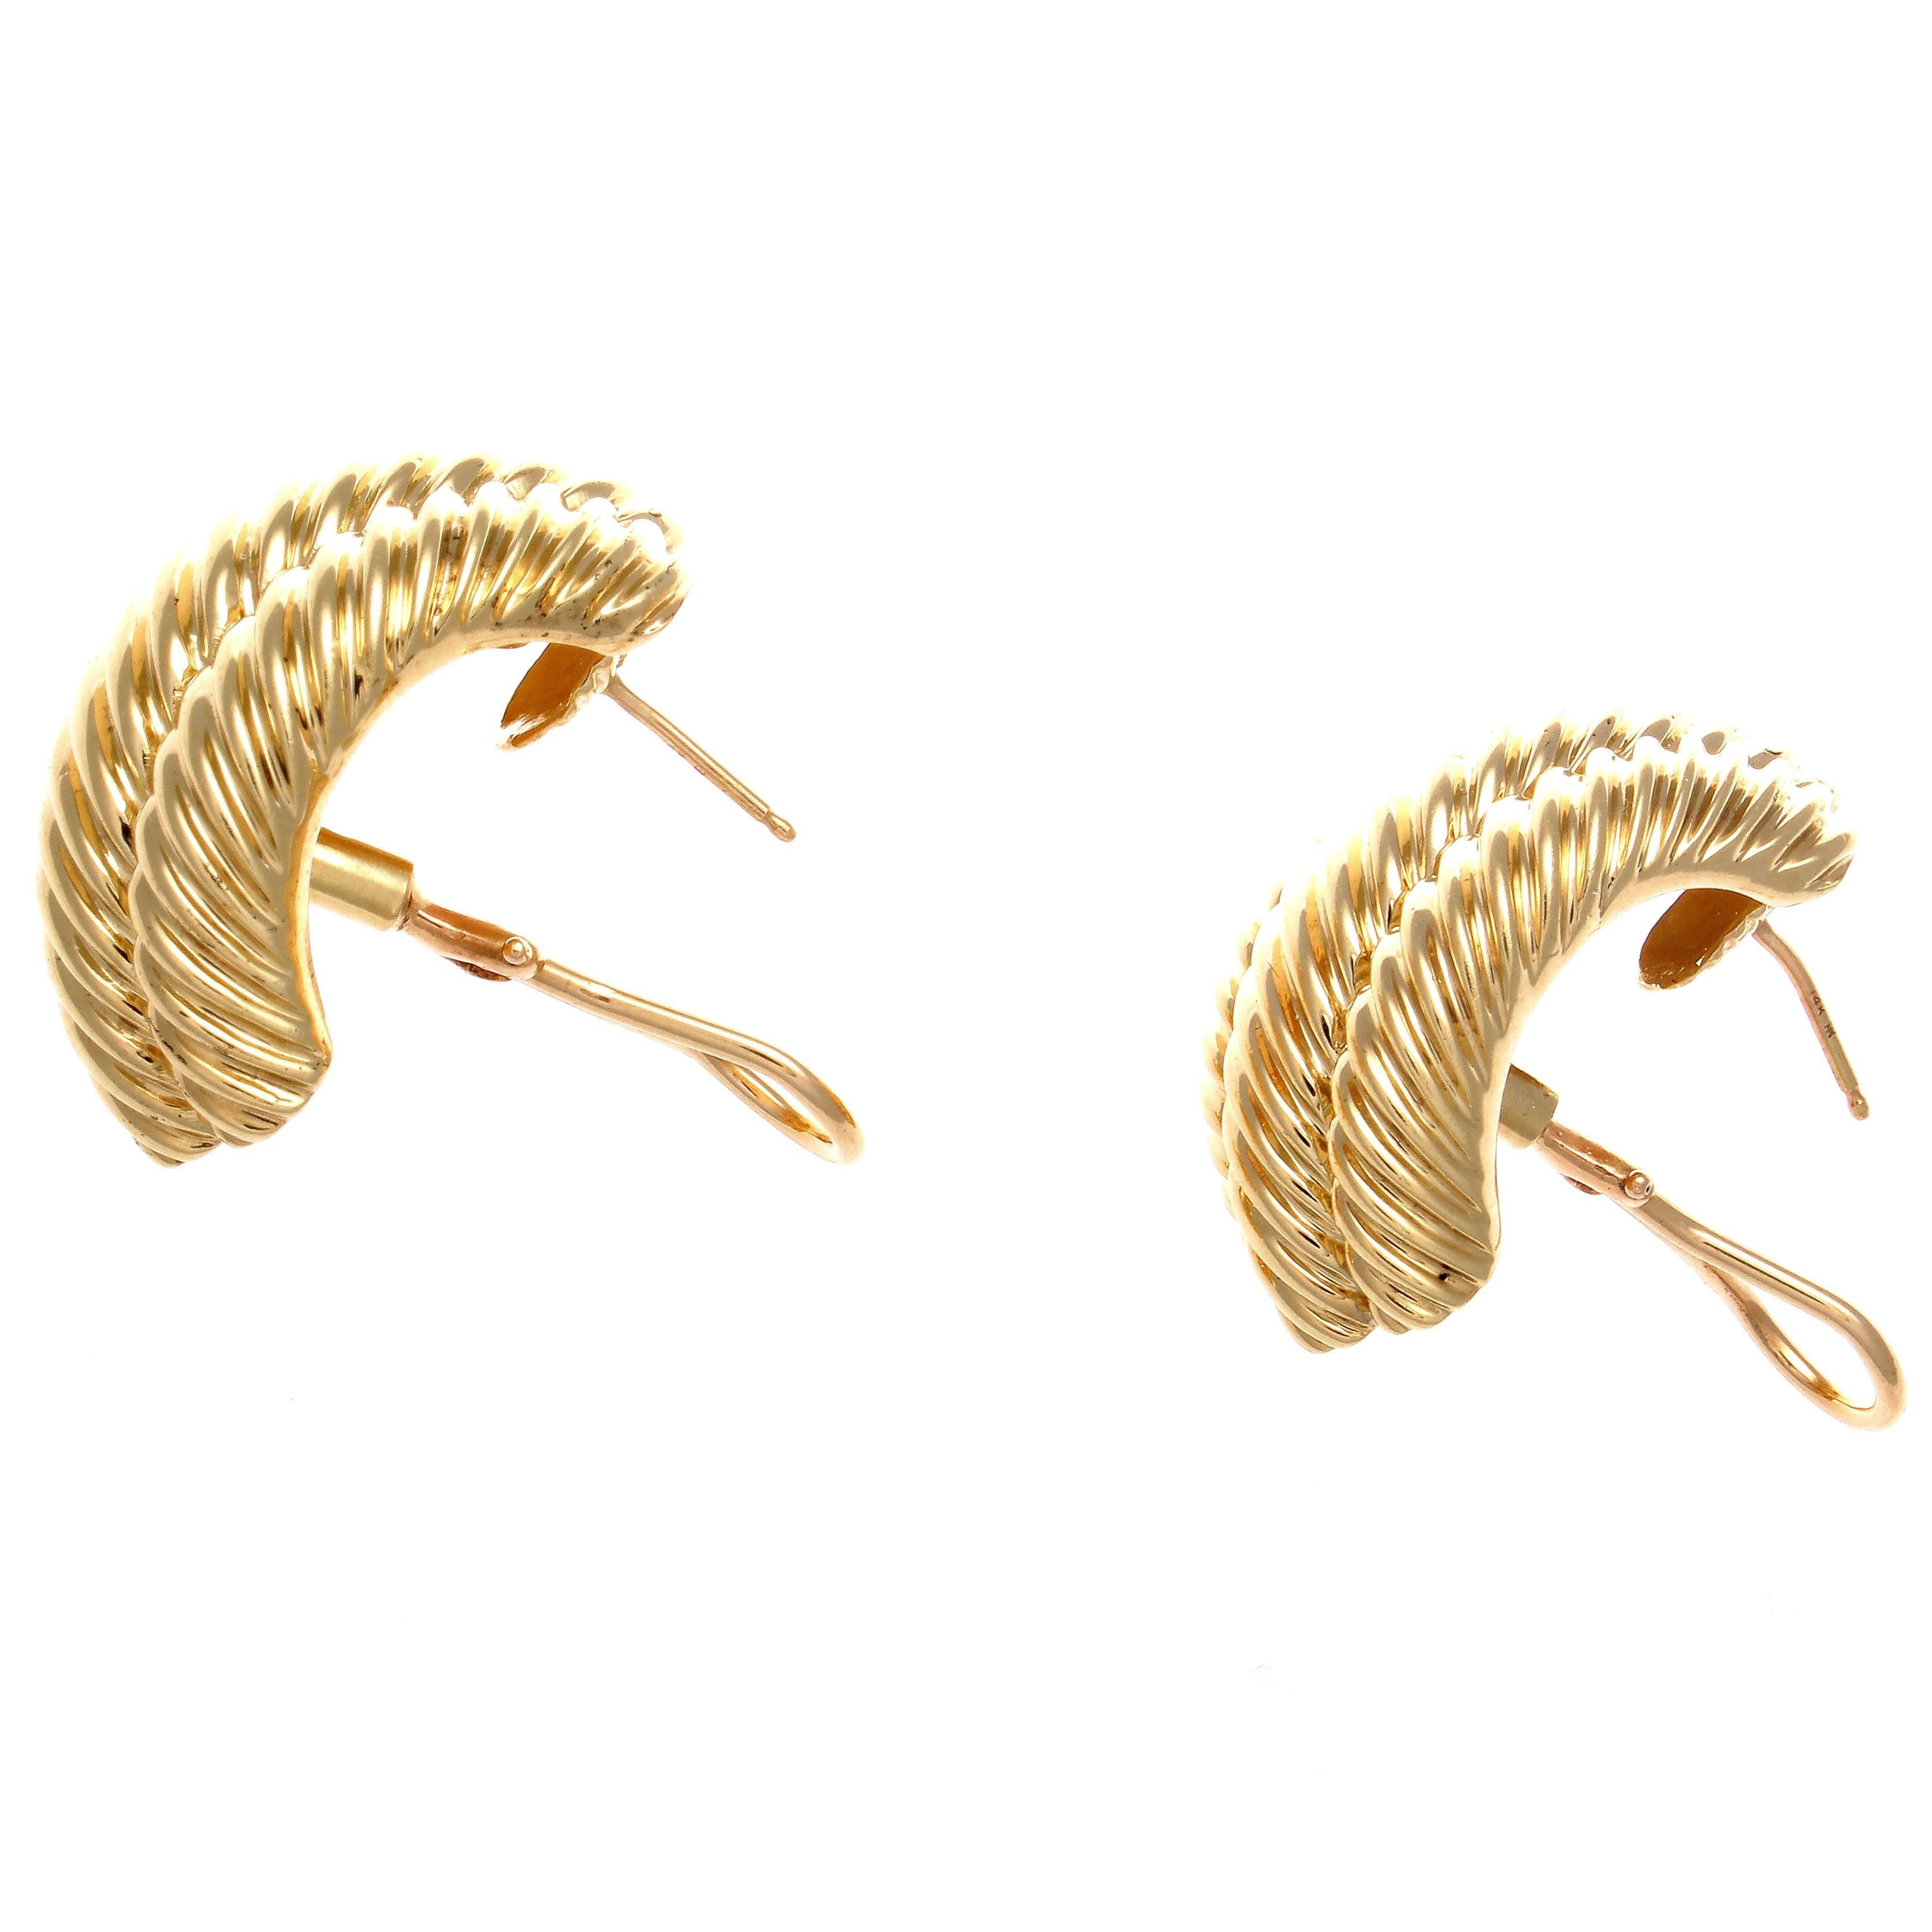 The twisted helix known as the cable design was first introduced in 1983 and is still David Yurman's most sought after creations. Designed in rolling contours of glistening 14k yellow gold that cascade down the ear. Signed David Yurman.

1-1/8